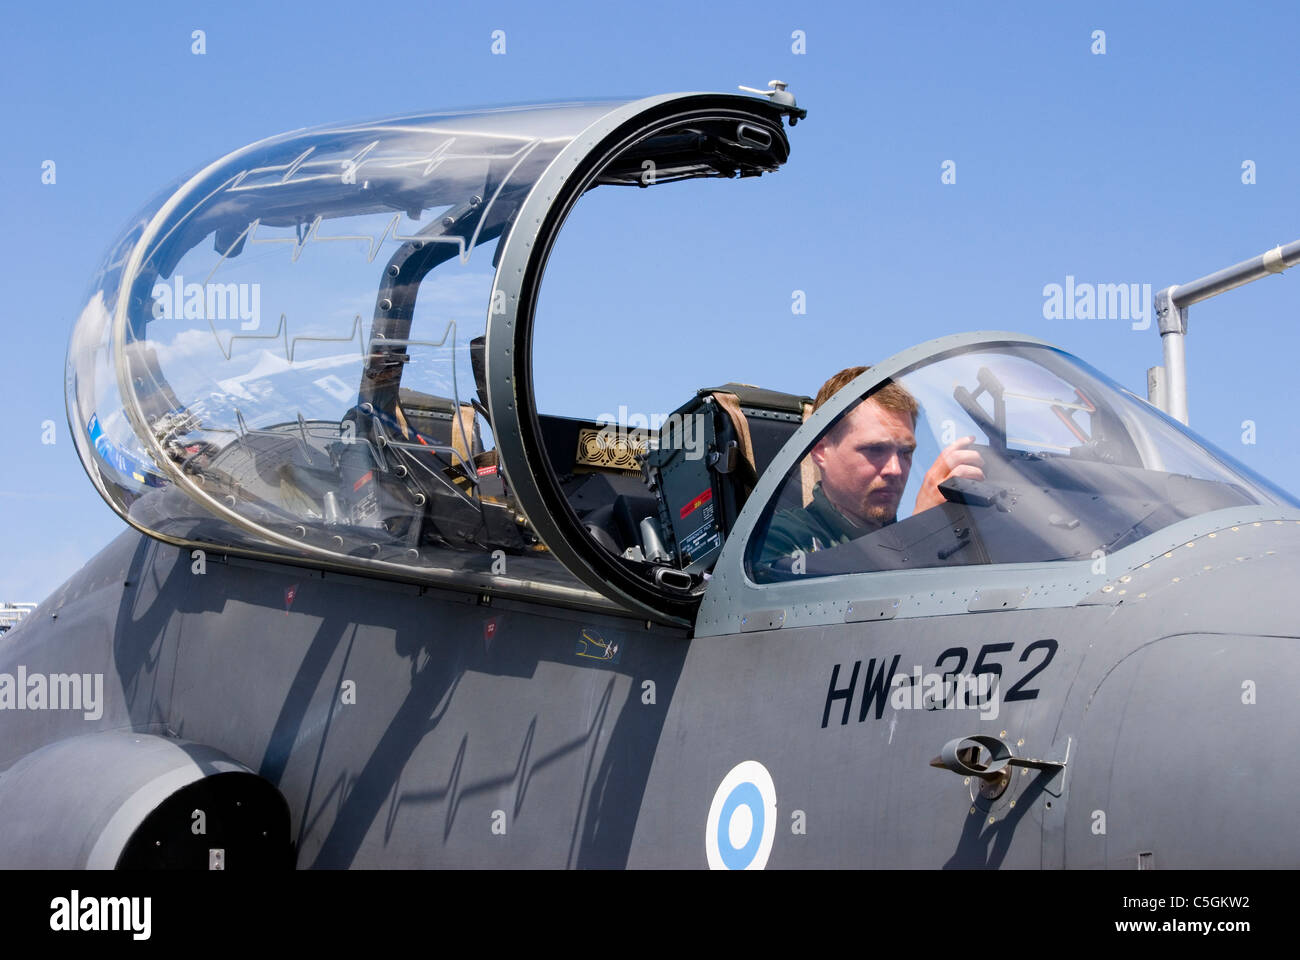 Military fighter aircraft with pilot seated in cockpit Stock Photo